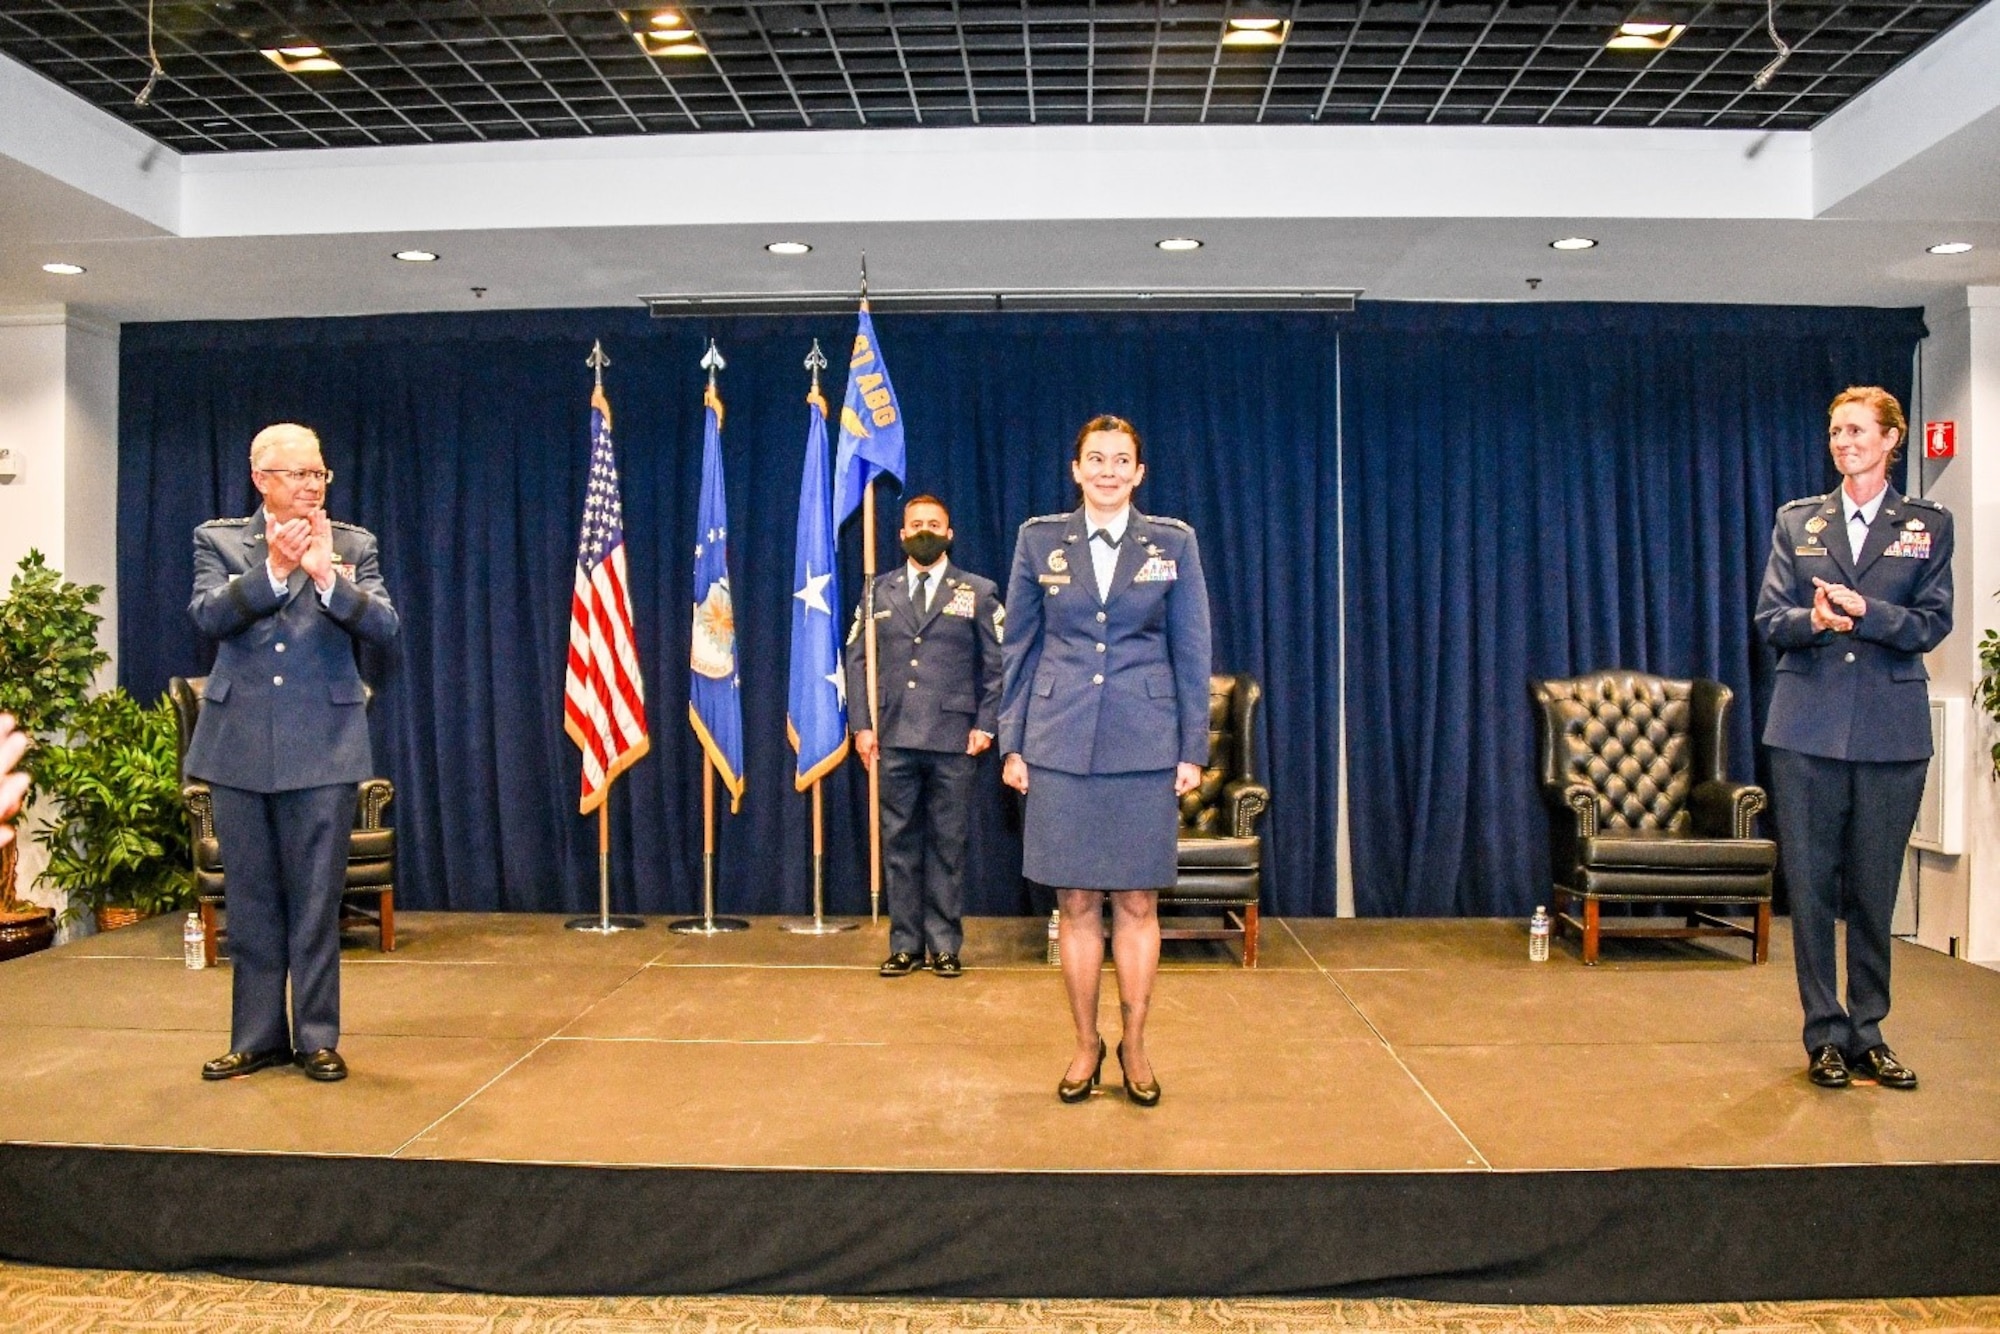 Lt. Gen. John F. Thompson, Space and Missile Systems Center commander and Air Force program executive officer for Space, officiates a change of command during which outgoing commander, Col. Ann Igl relinquishes leadership of the 61st Air Base Group to Col. Becky Beers inside SMC's Gordon Conference Center July 15, 2020 at the Los Angeles Air Force Base in El Segundo, Calif. (U.S. Air Force photo/Van De Ha)